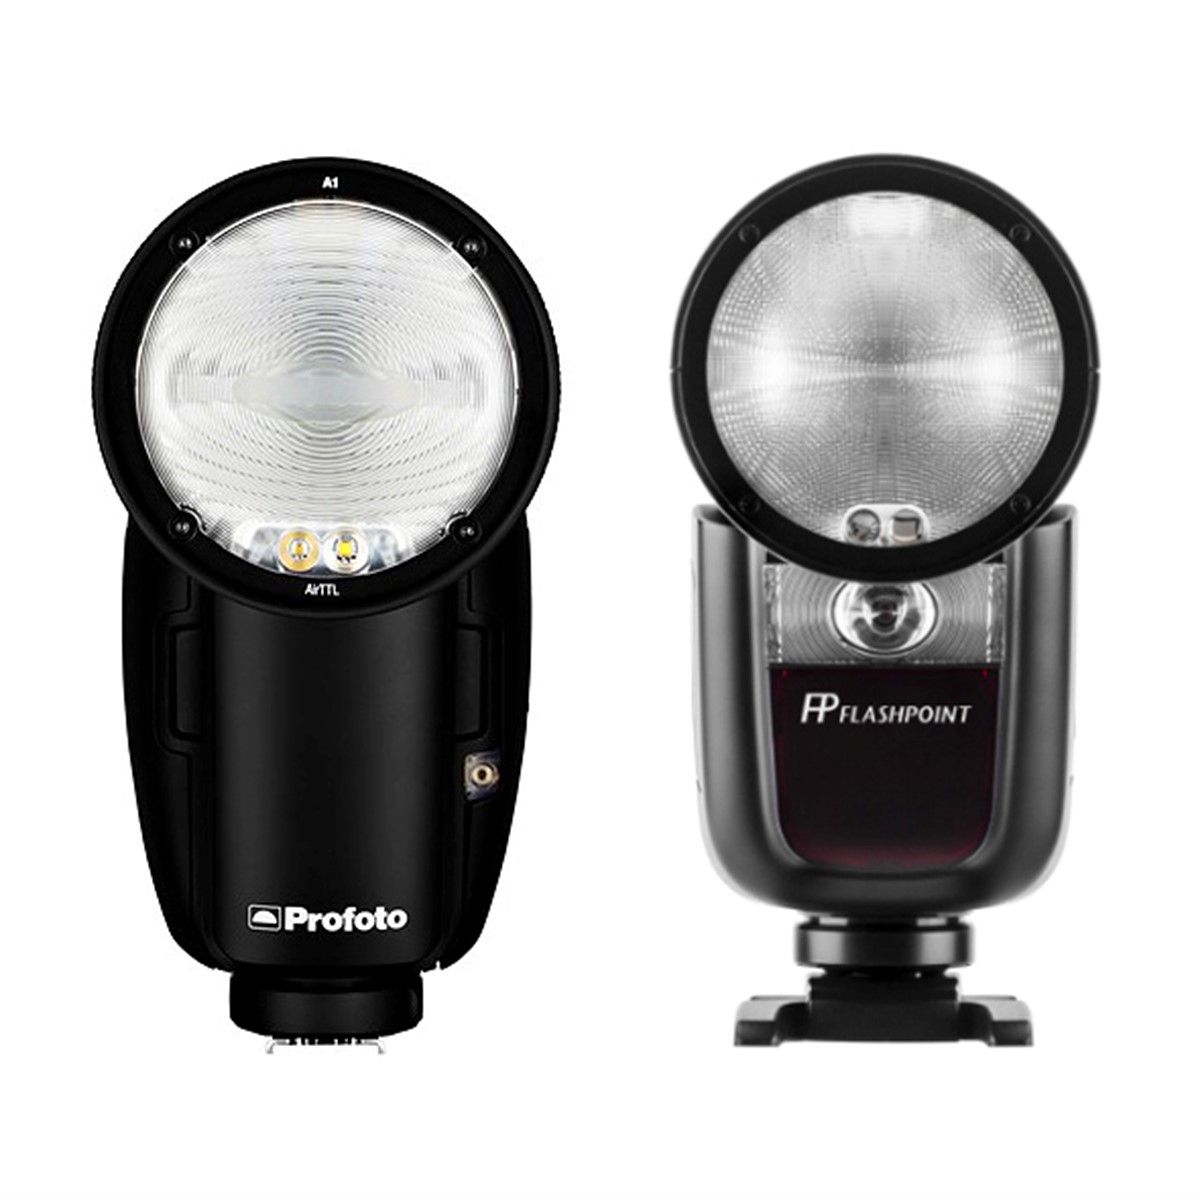 Profoto Prepares To Sue Godox Over Alleged A1 Light Patent Throughout Sue 1 Light Single Jar Pendants (View 30 of 30)